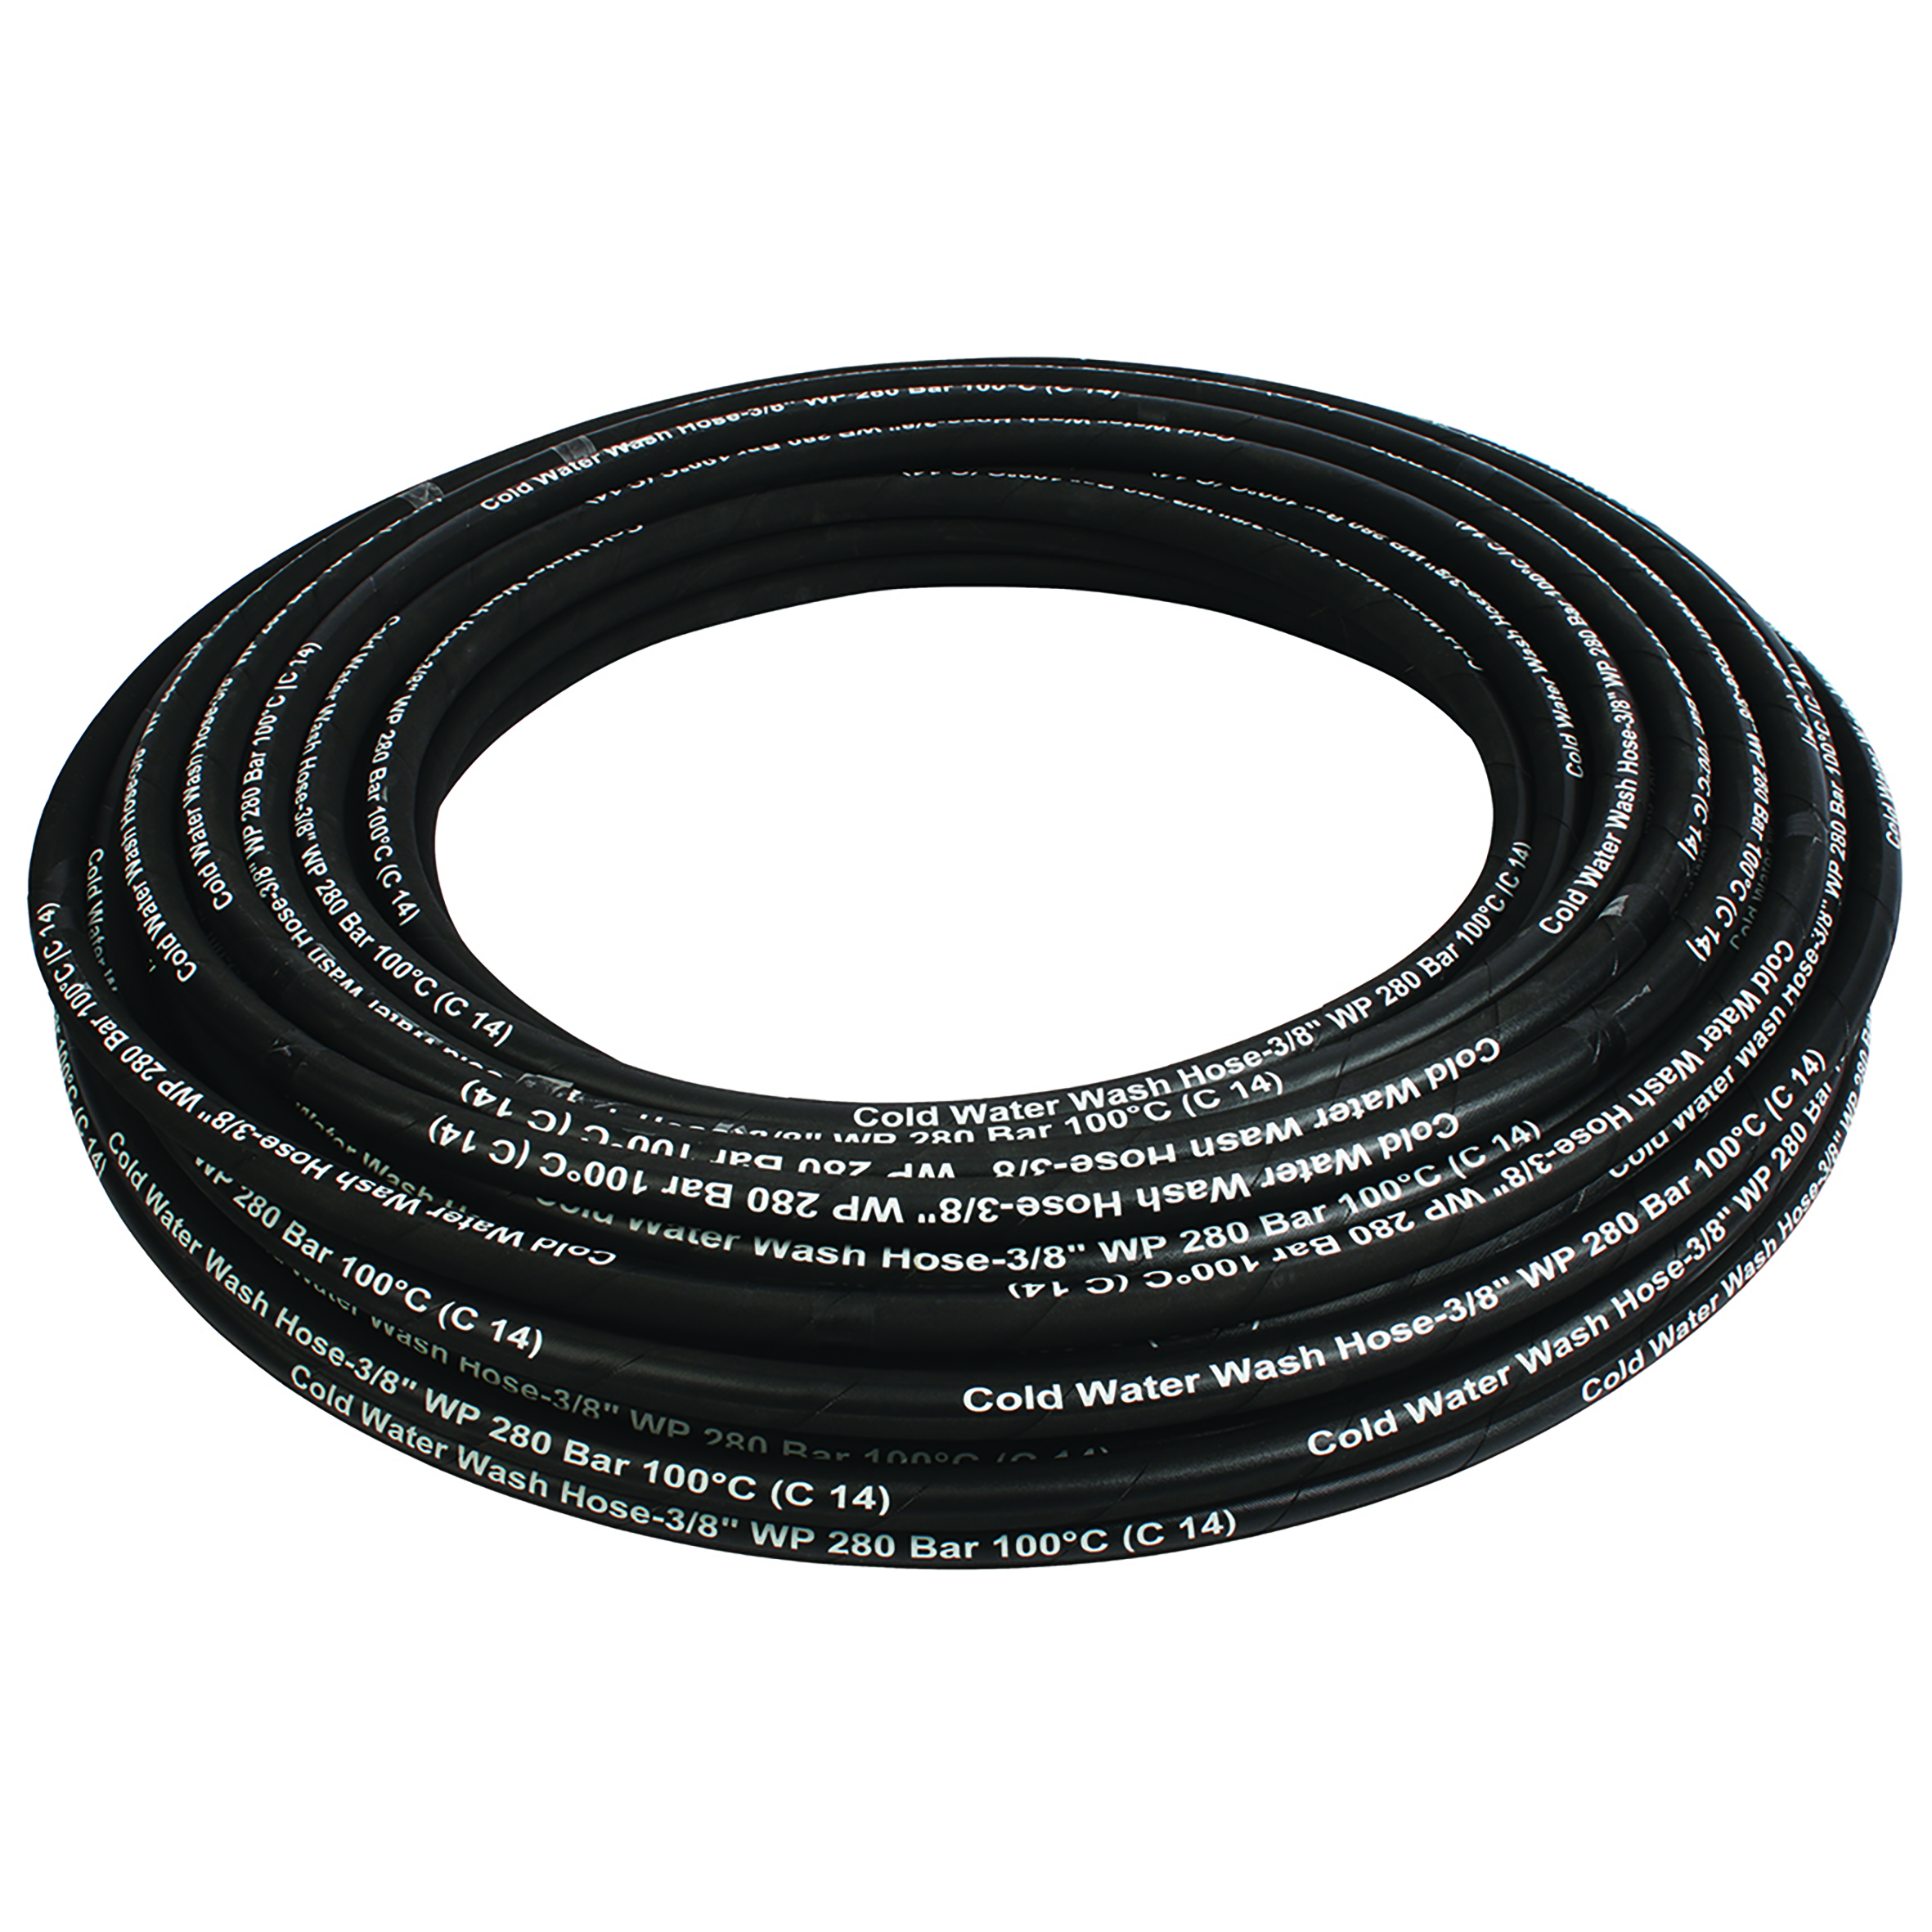 COLD WATER 1/4" R2 BLACK 25M